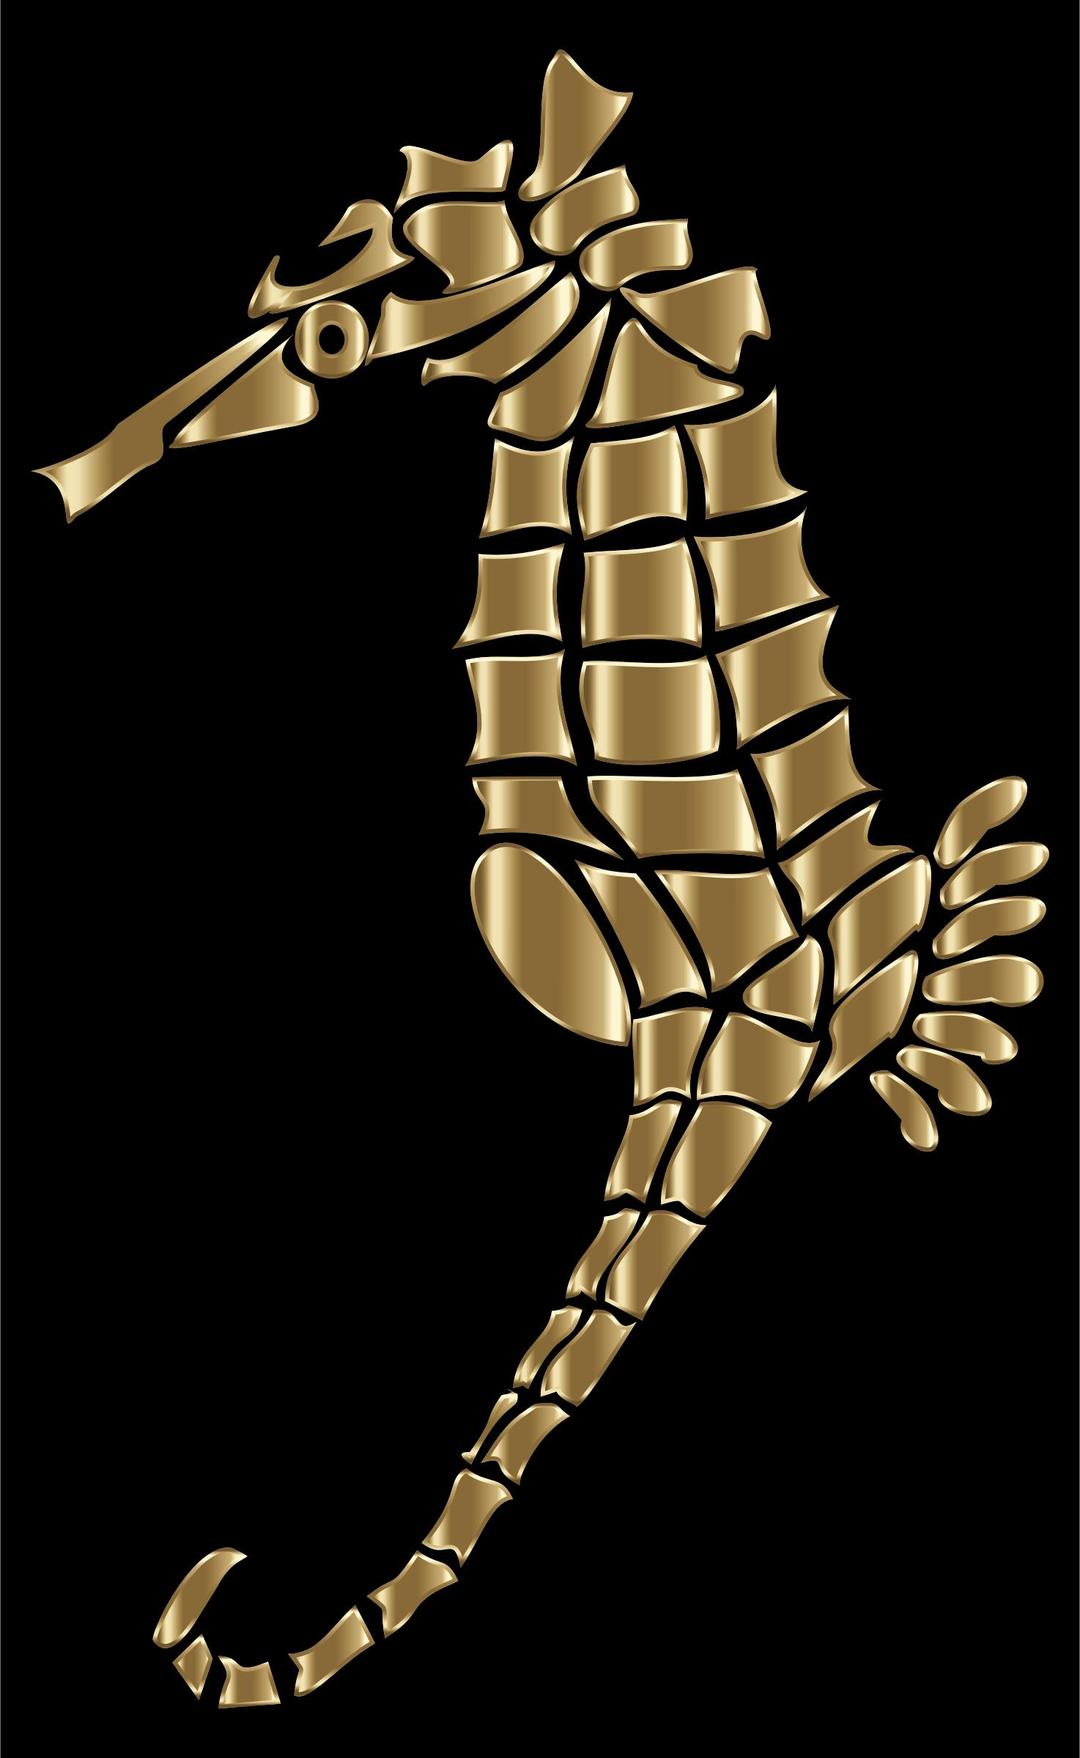 Polished Copper Stylized Seahorse Silhouette png transparent